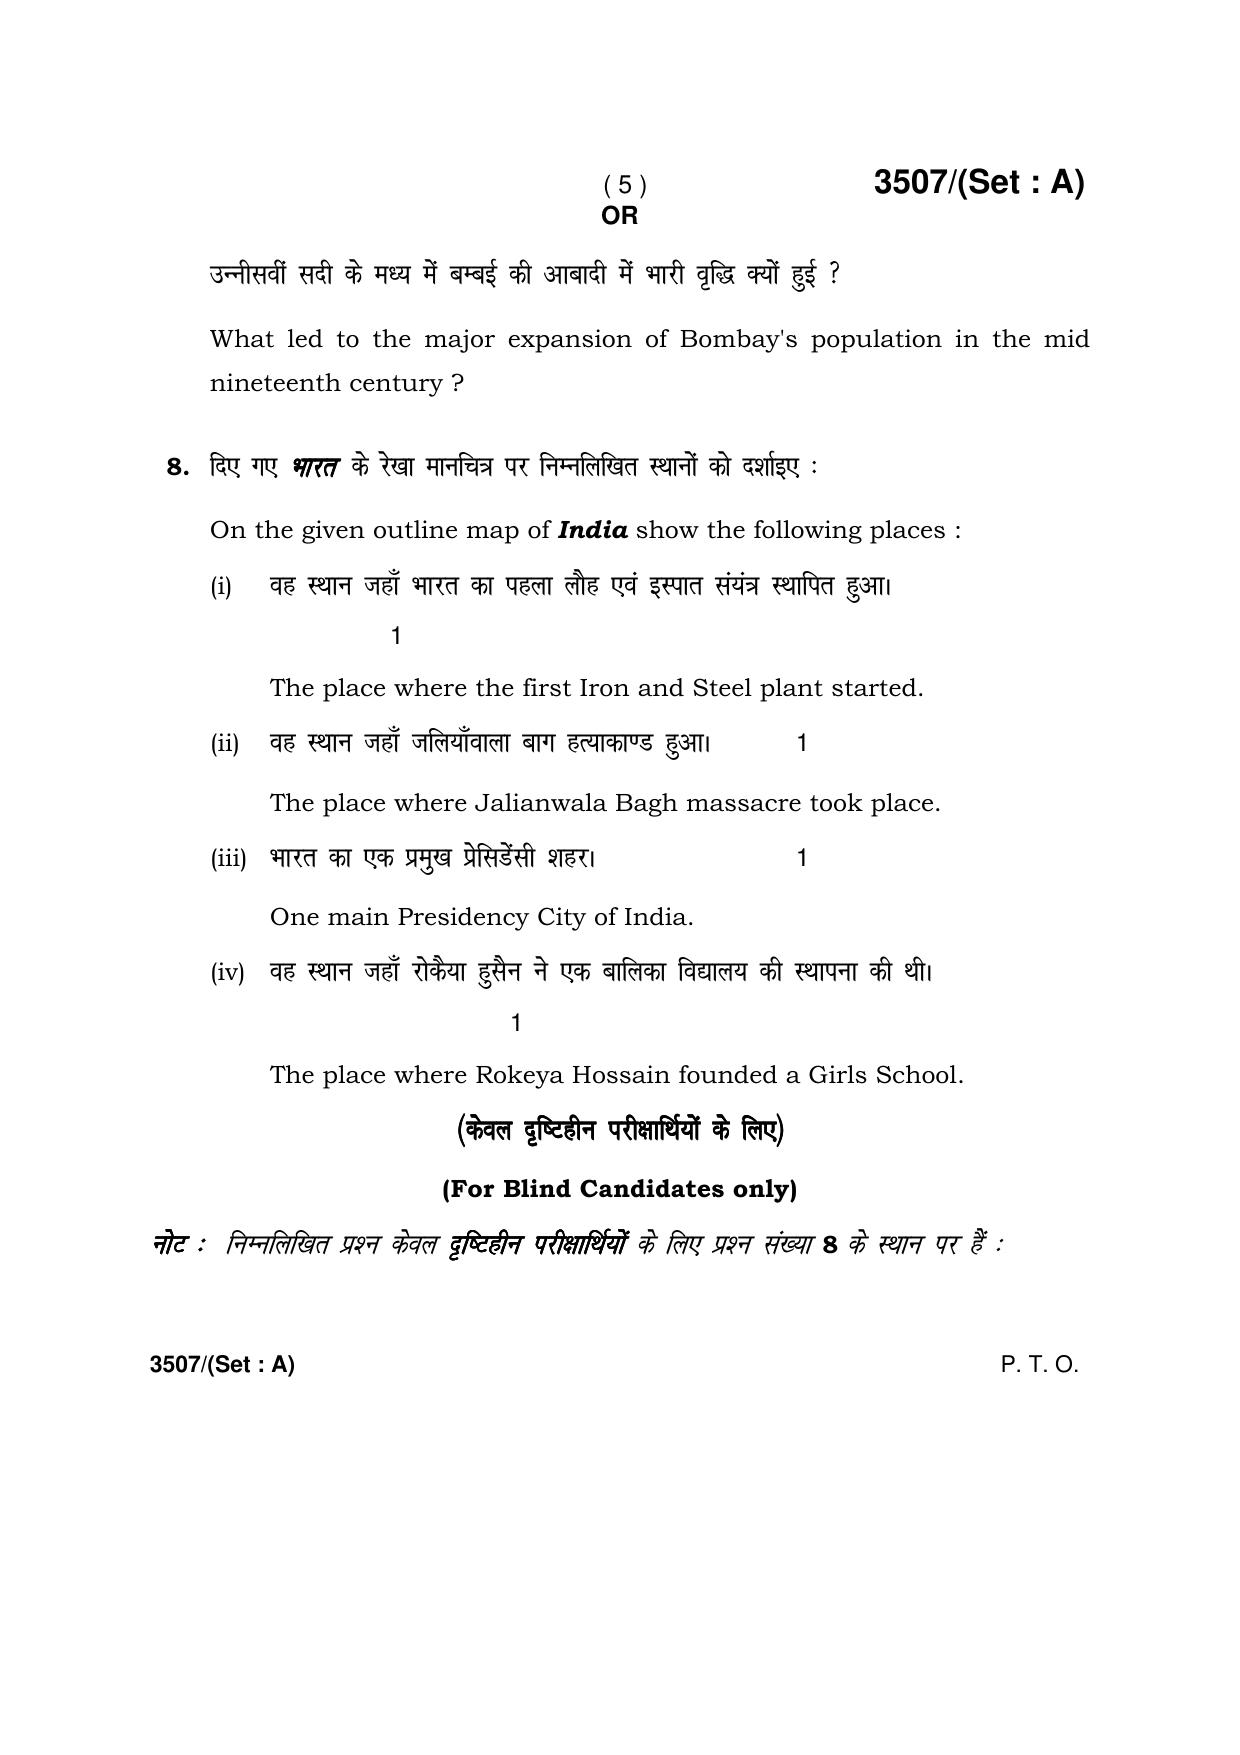 Haryana Board HBSE Class 10 Social Science -A 2018 Question Paper - Page 5